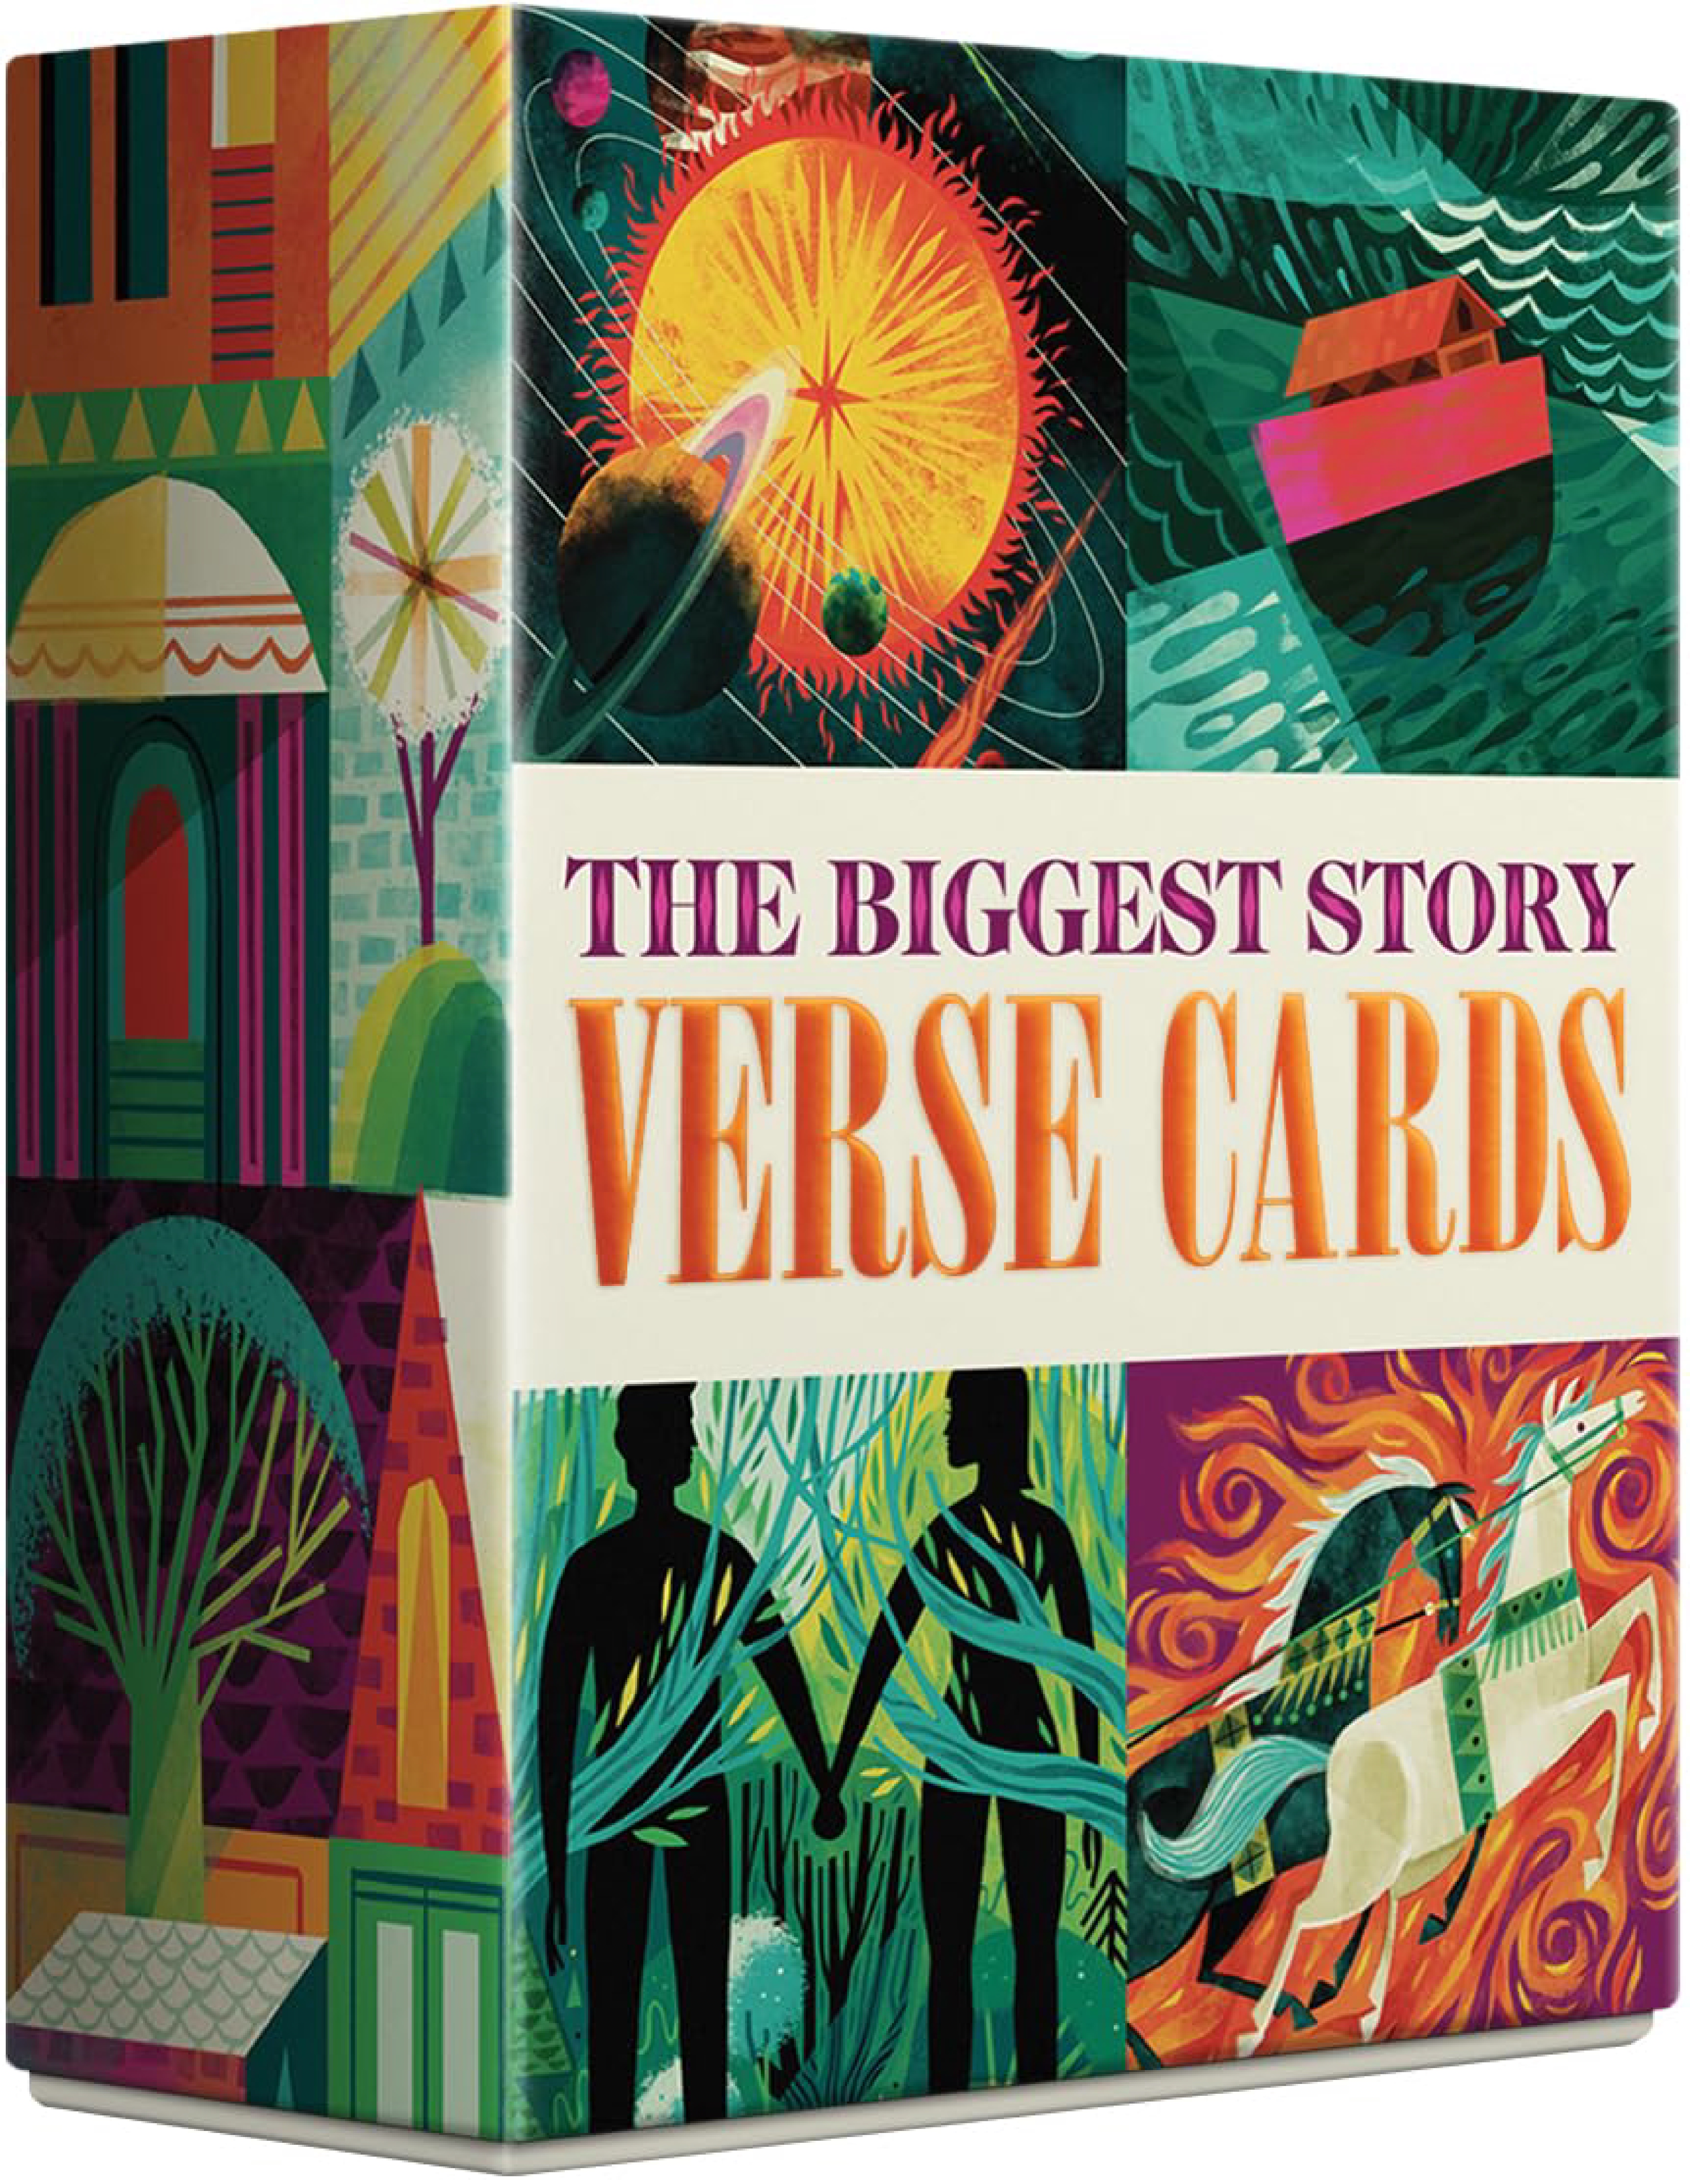 The Biggest Story Verse Cards Book Cover